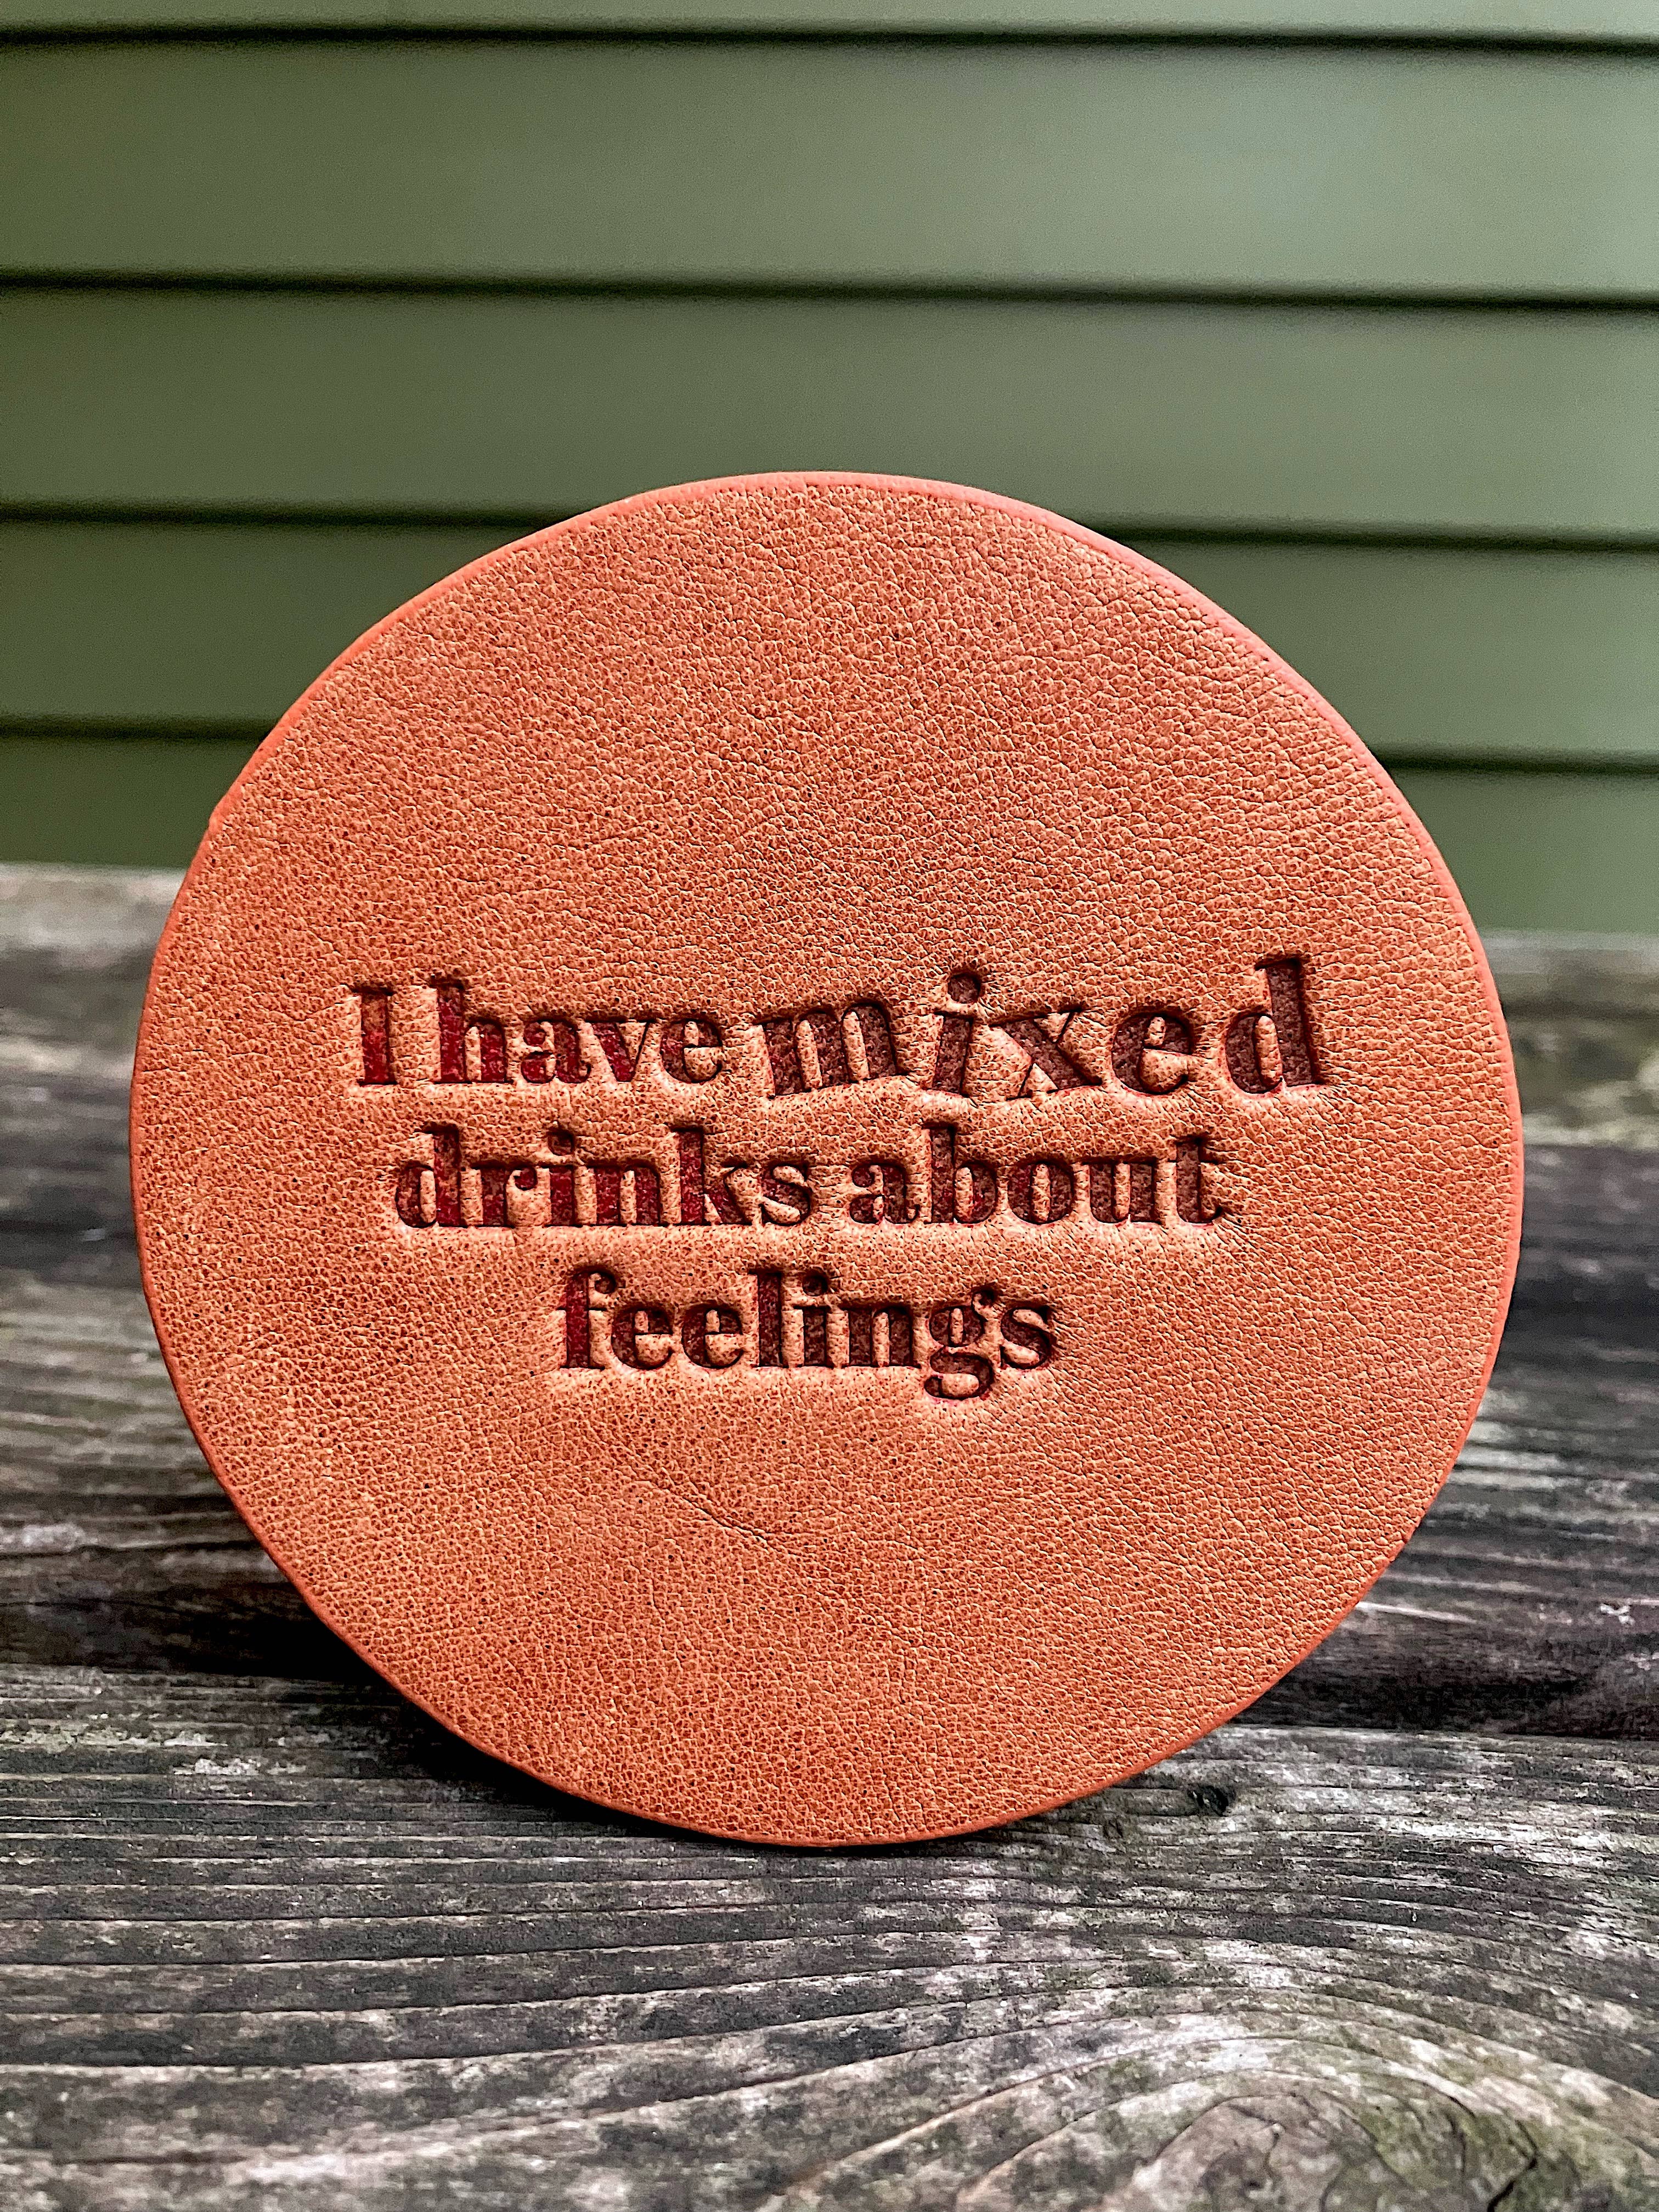 I Have Mixed Drinks About Feelings Leather Coaster